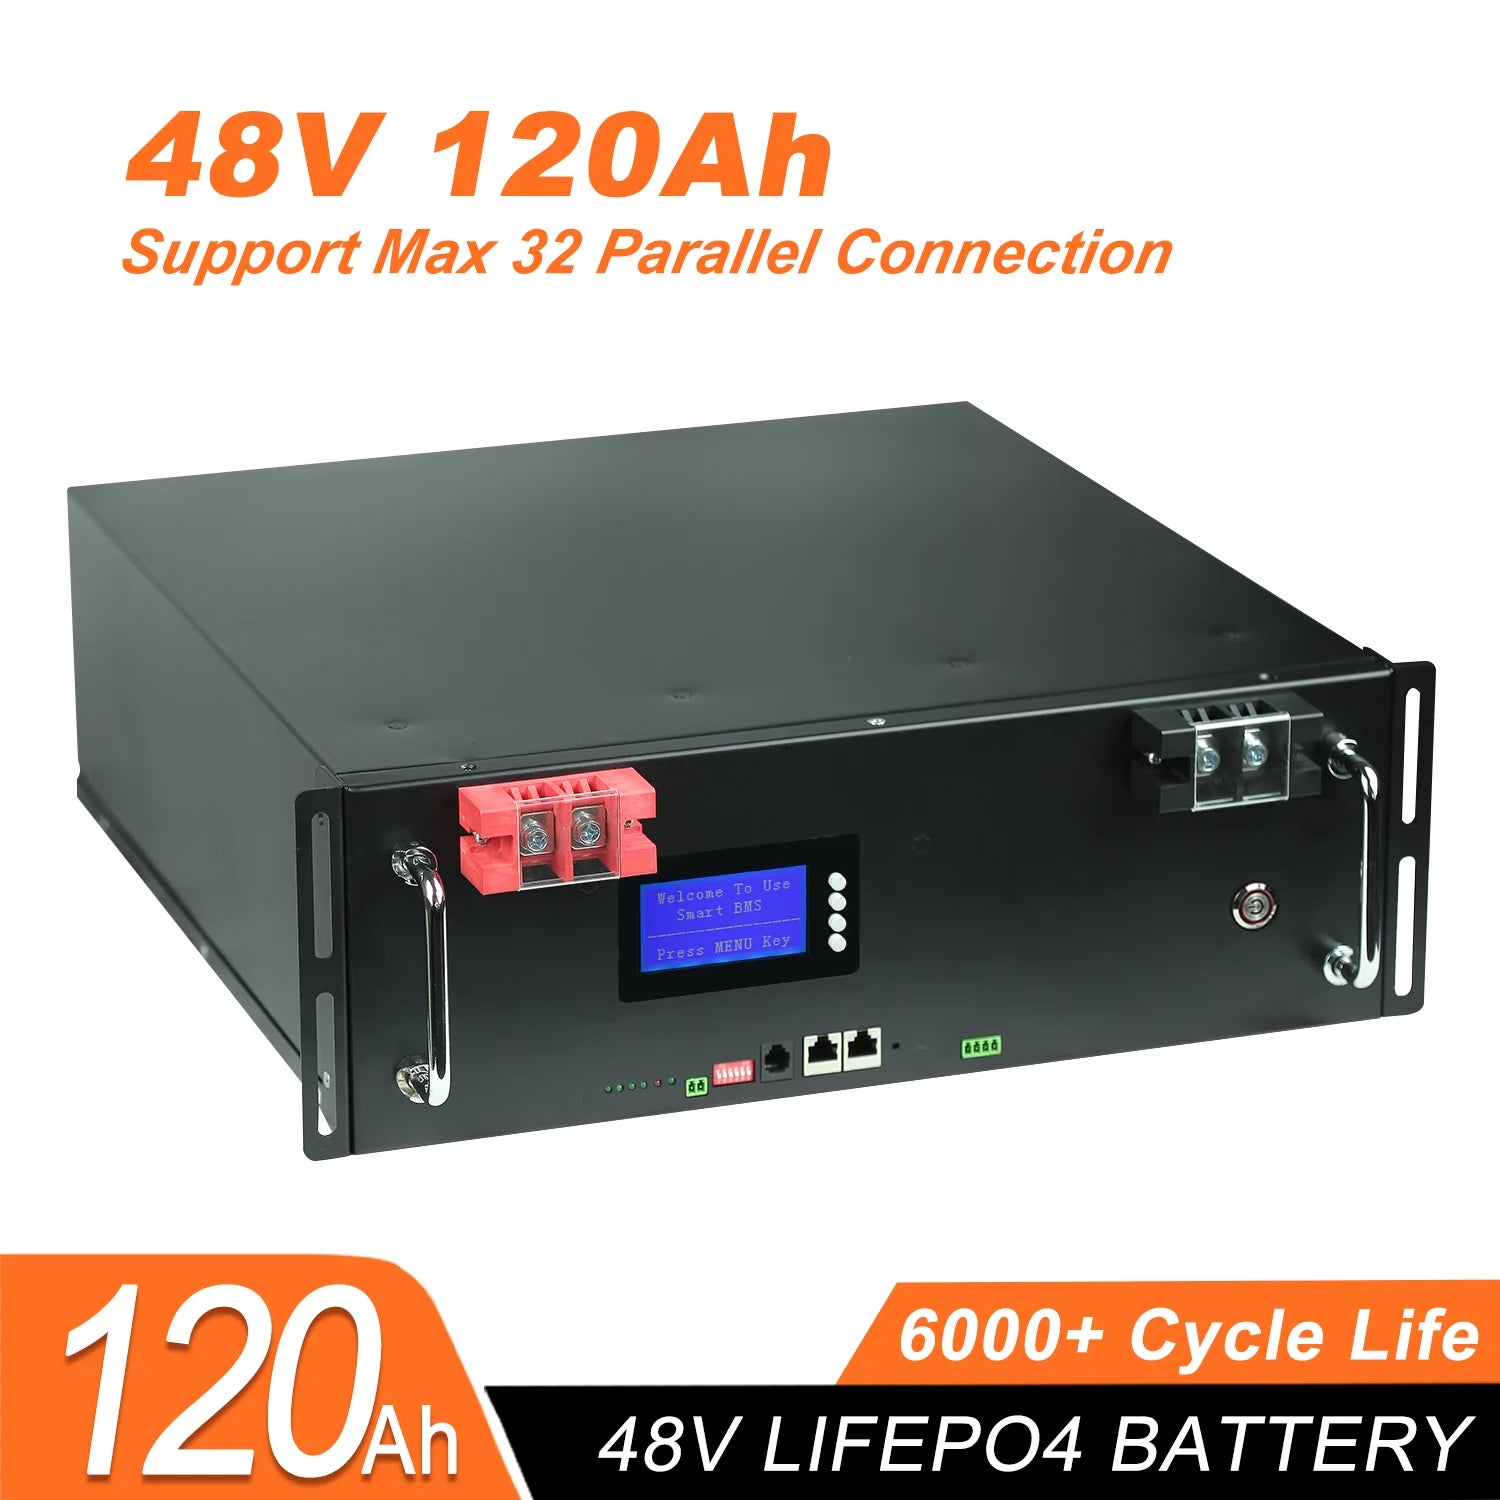 High-capacity battery supports up to 32 parallel connections and features 48V, 120Ah capacity.